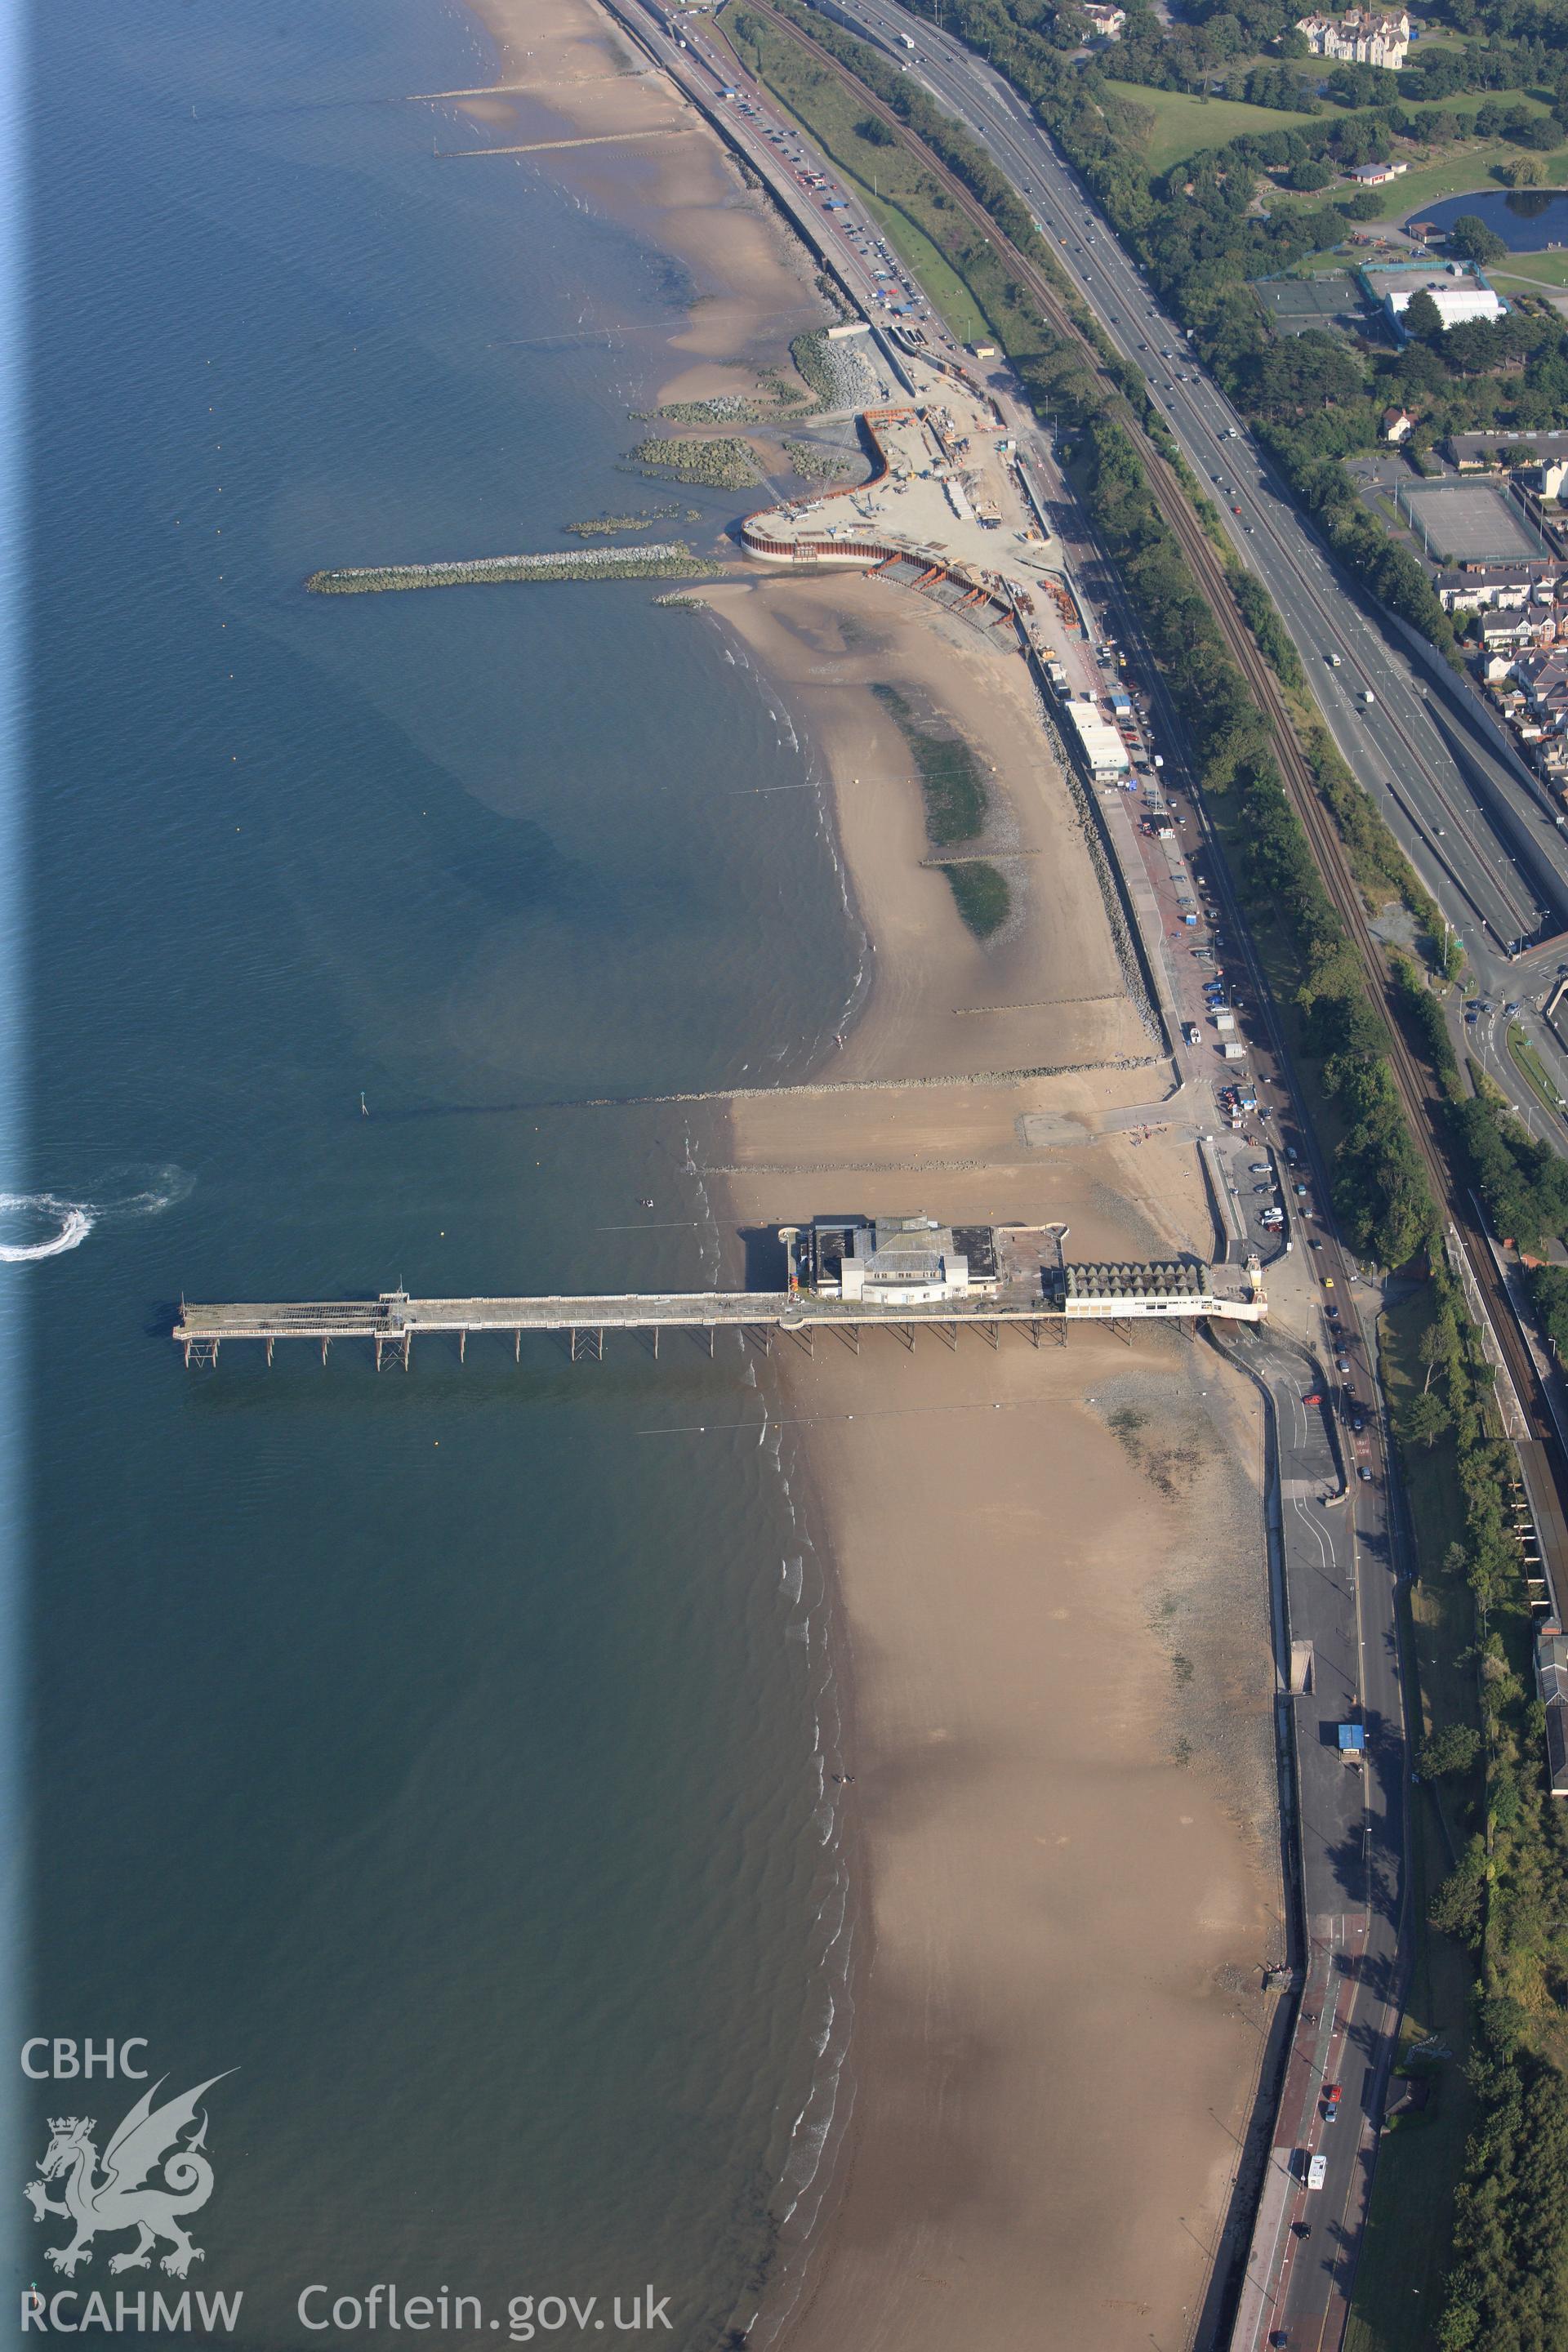 RCAHMW colour oblique photograph of Victoria Pier and pavilion. Taken by Toby Driver and Oliver Davies on 27/07/2011.